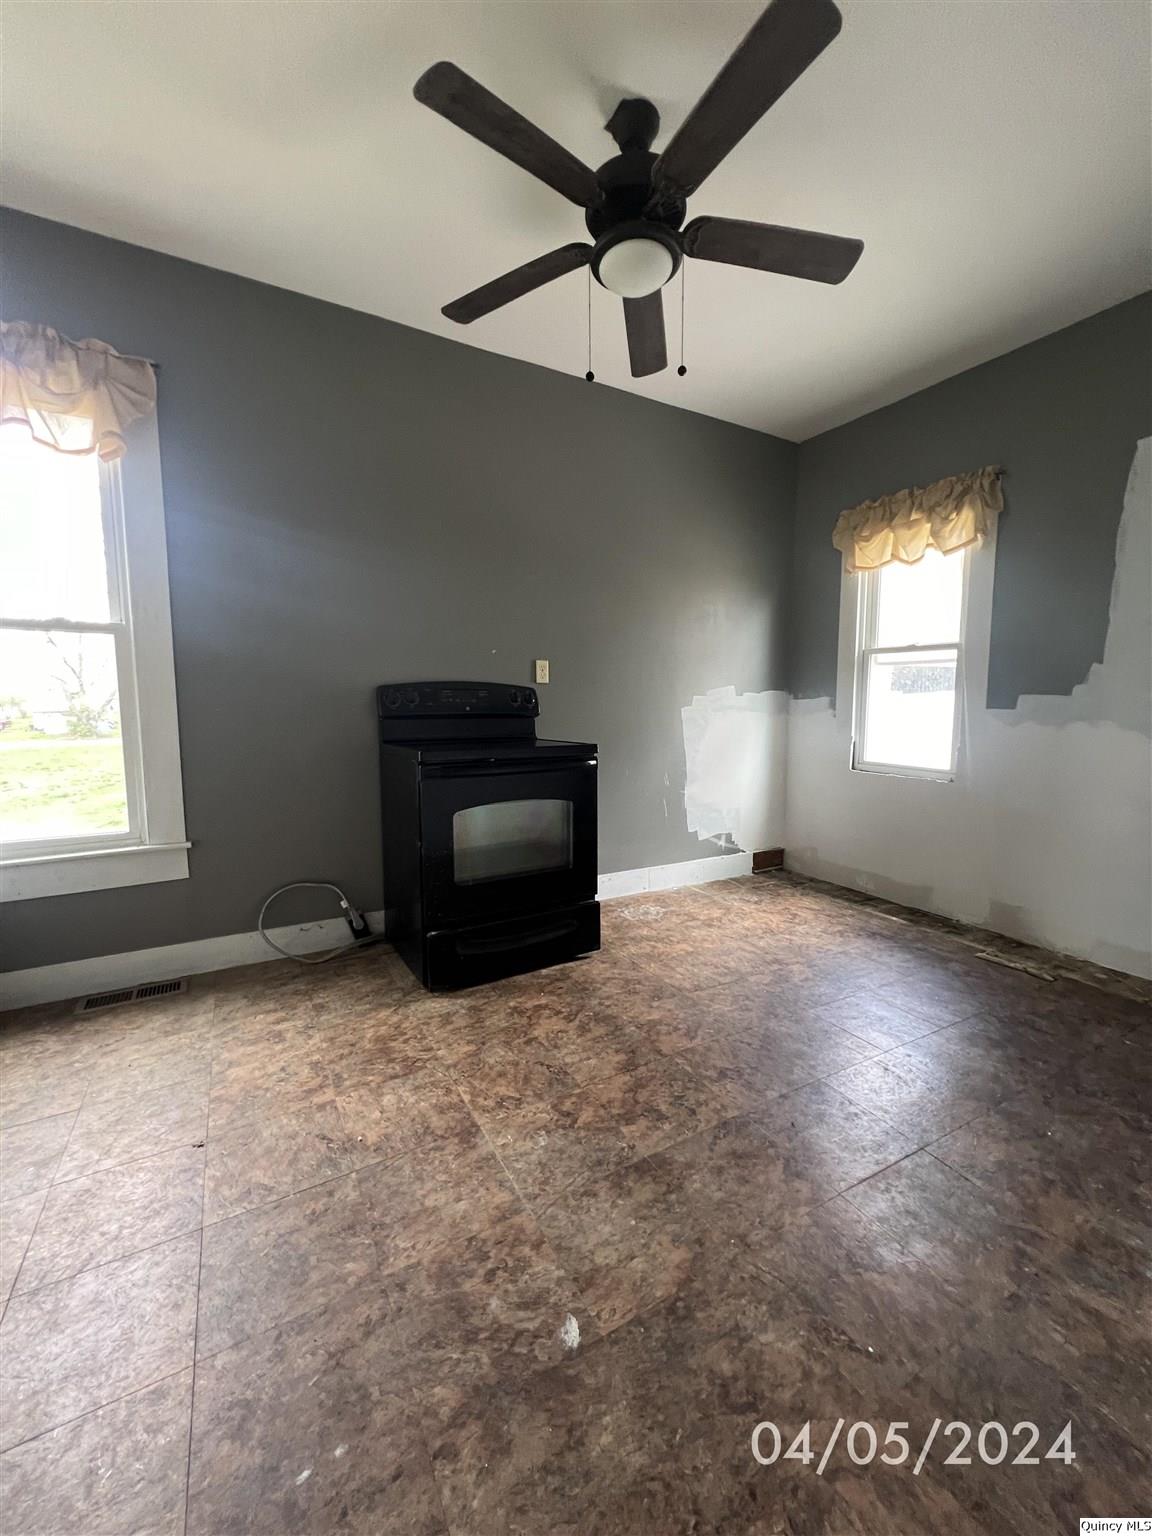 103 E Louden, Barry, Illinois 62312, 3 Bedrooms Bedrooms, ,1 BathroomBathrooms,Residential,For Sale,103 E Louden,203342